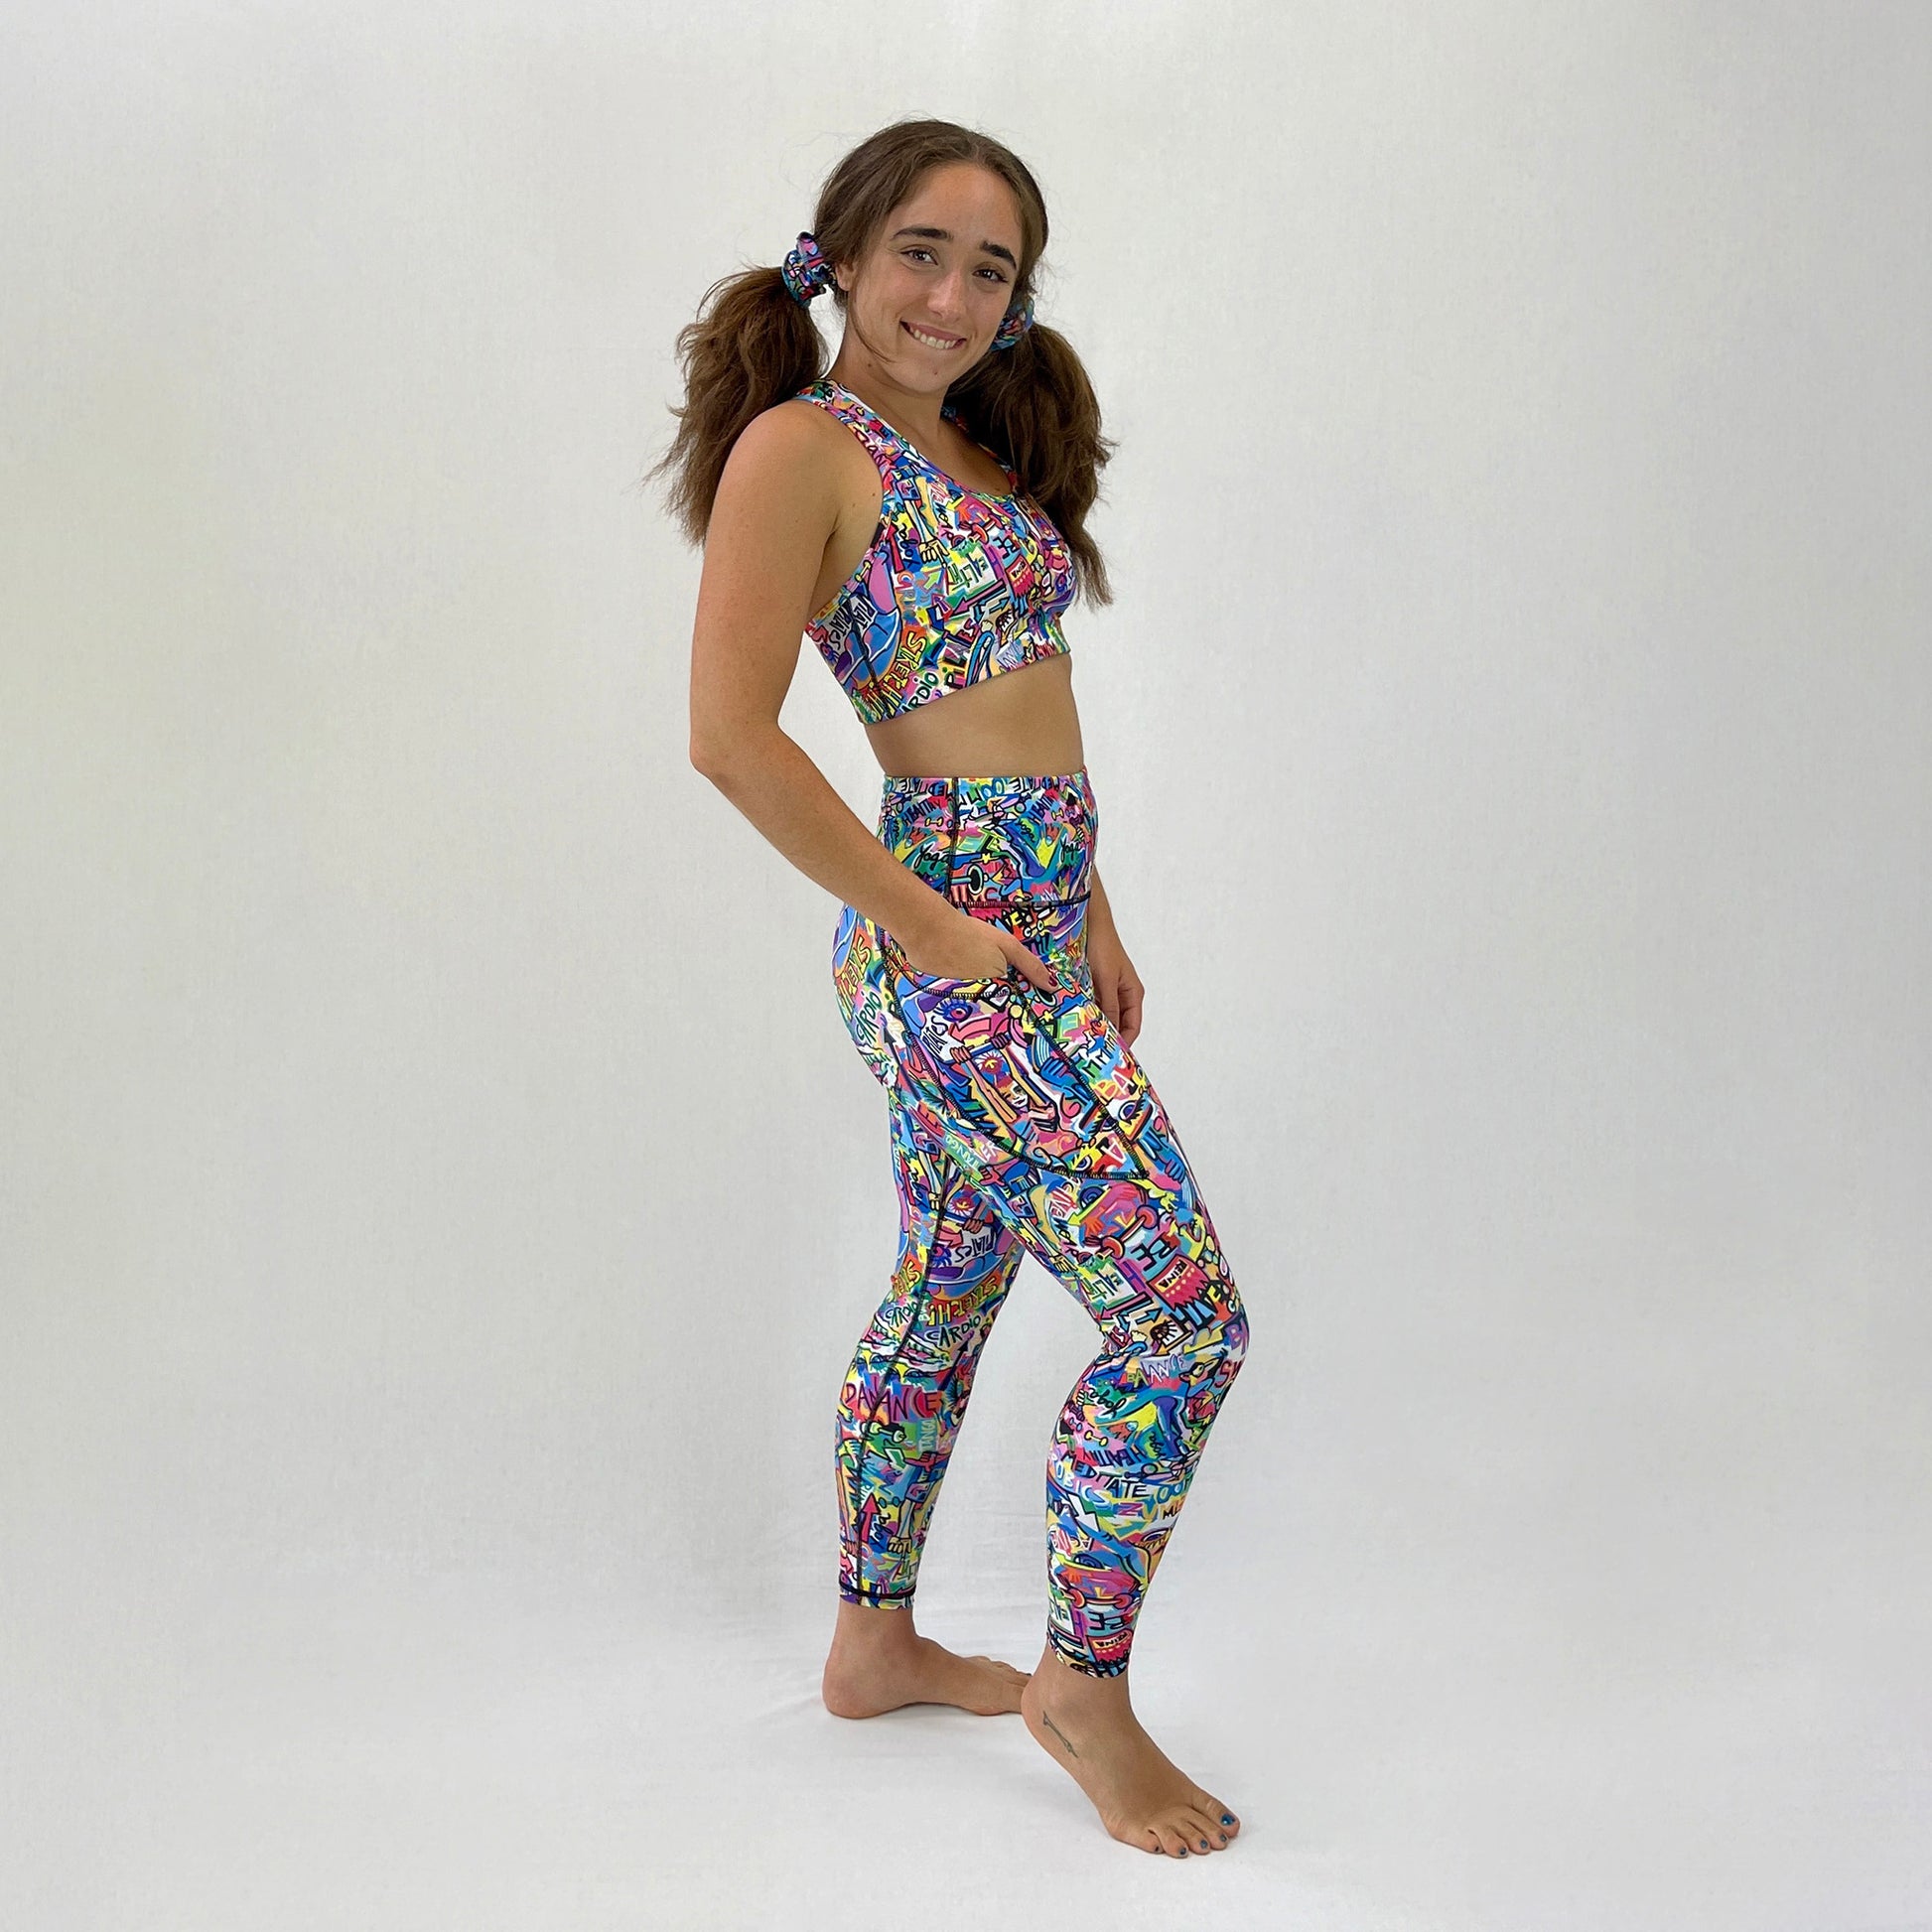 Ethical High Waisted Leggings Art2Go Doodlz by Monique Baques full body